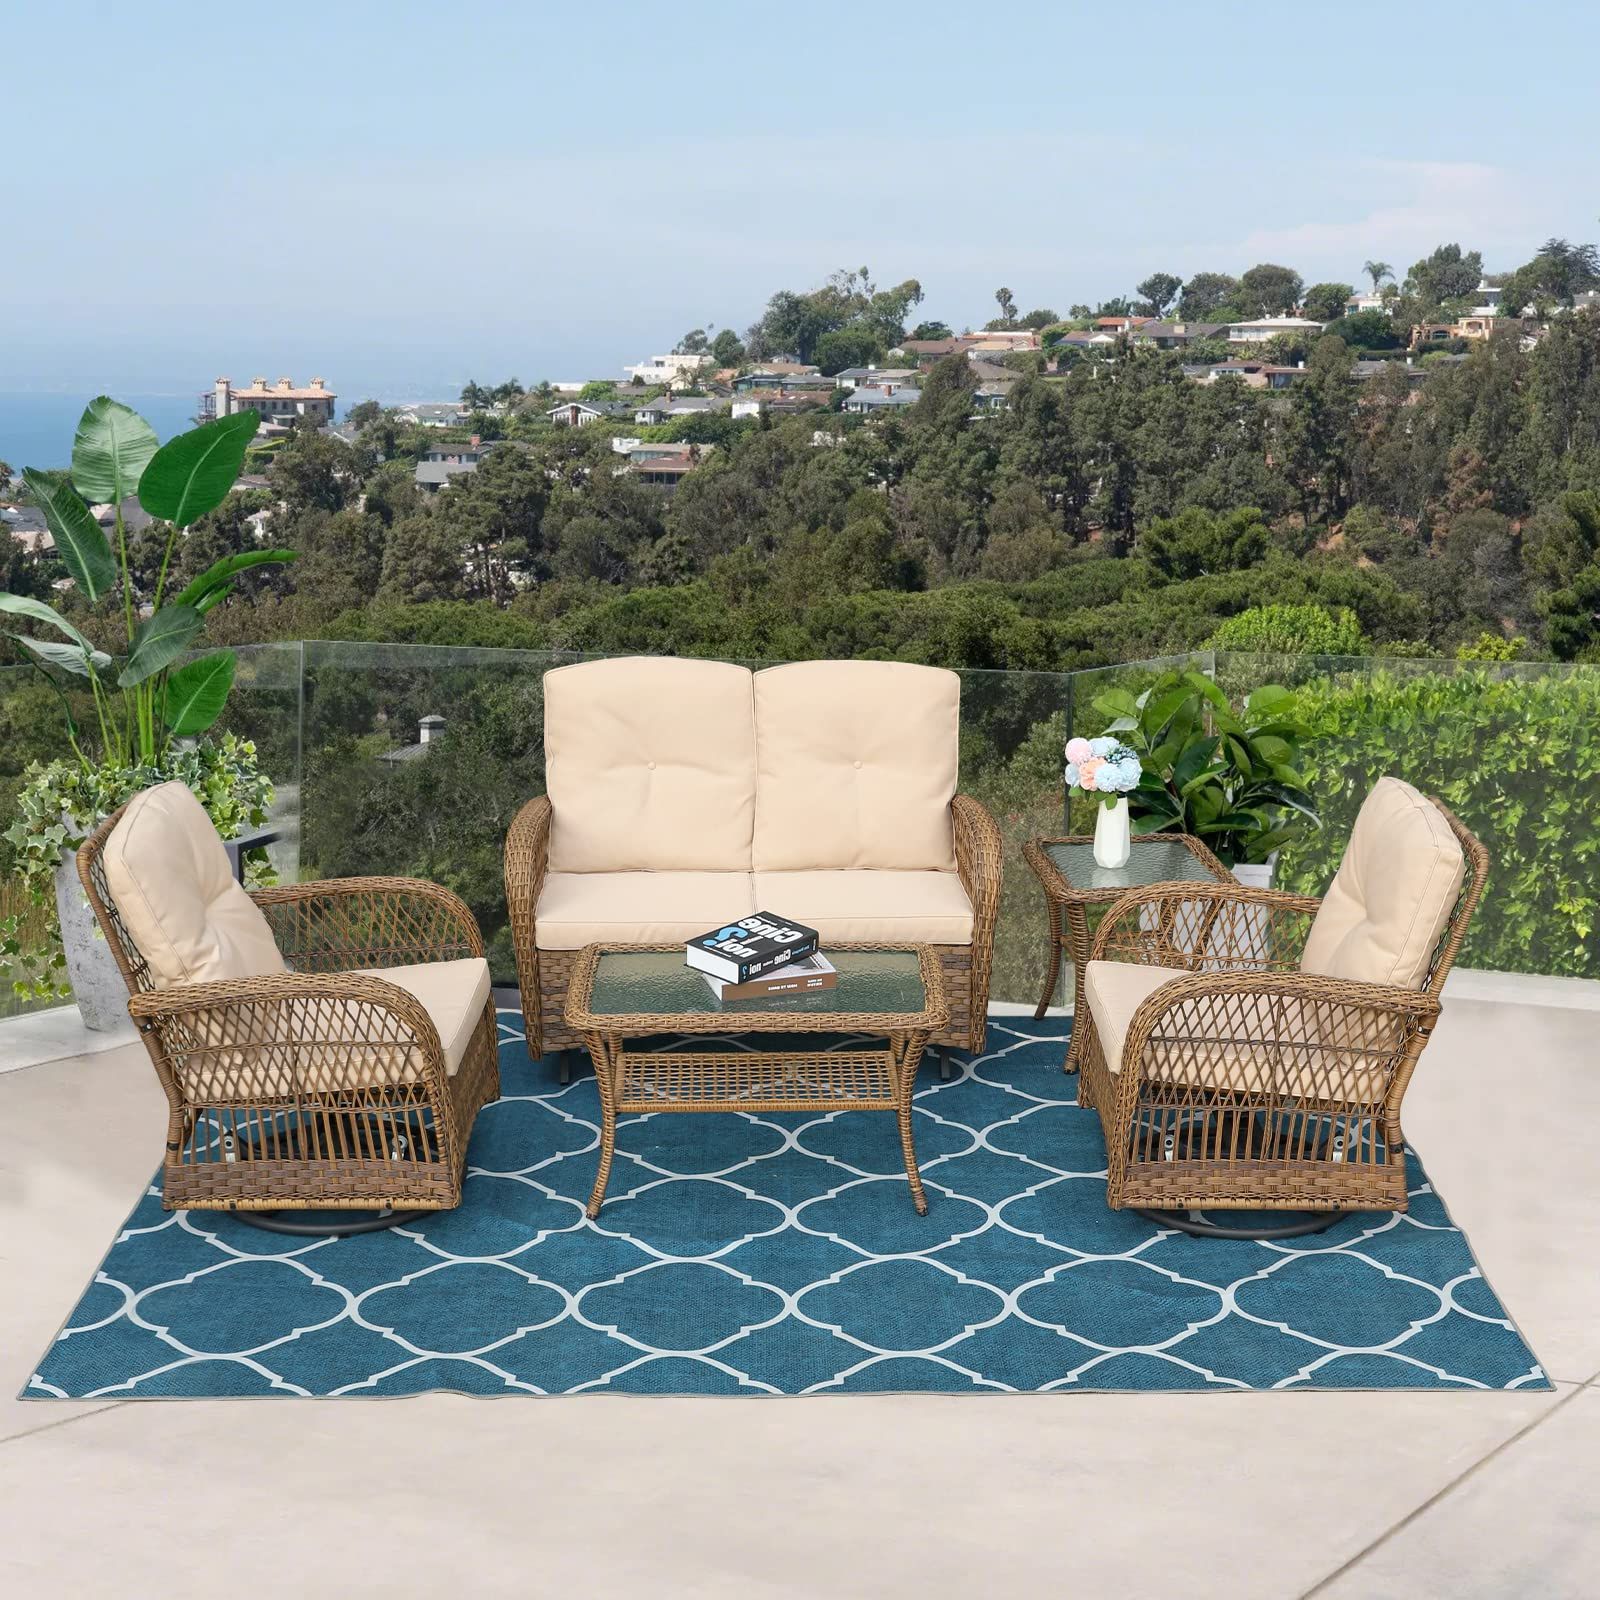 Featured Photo of 15 Best All-weather Rattan Conversation Set